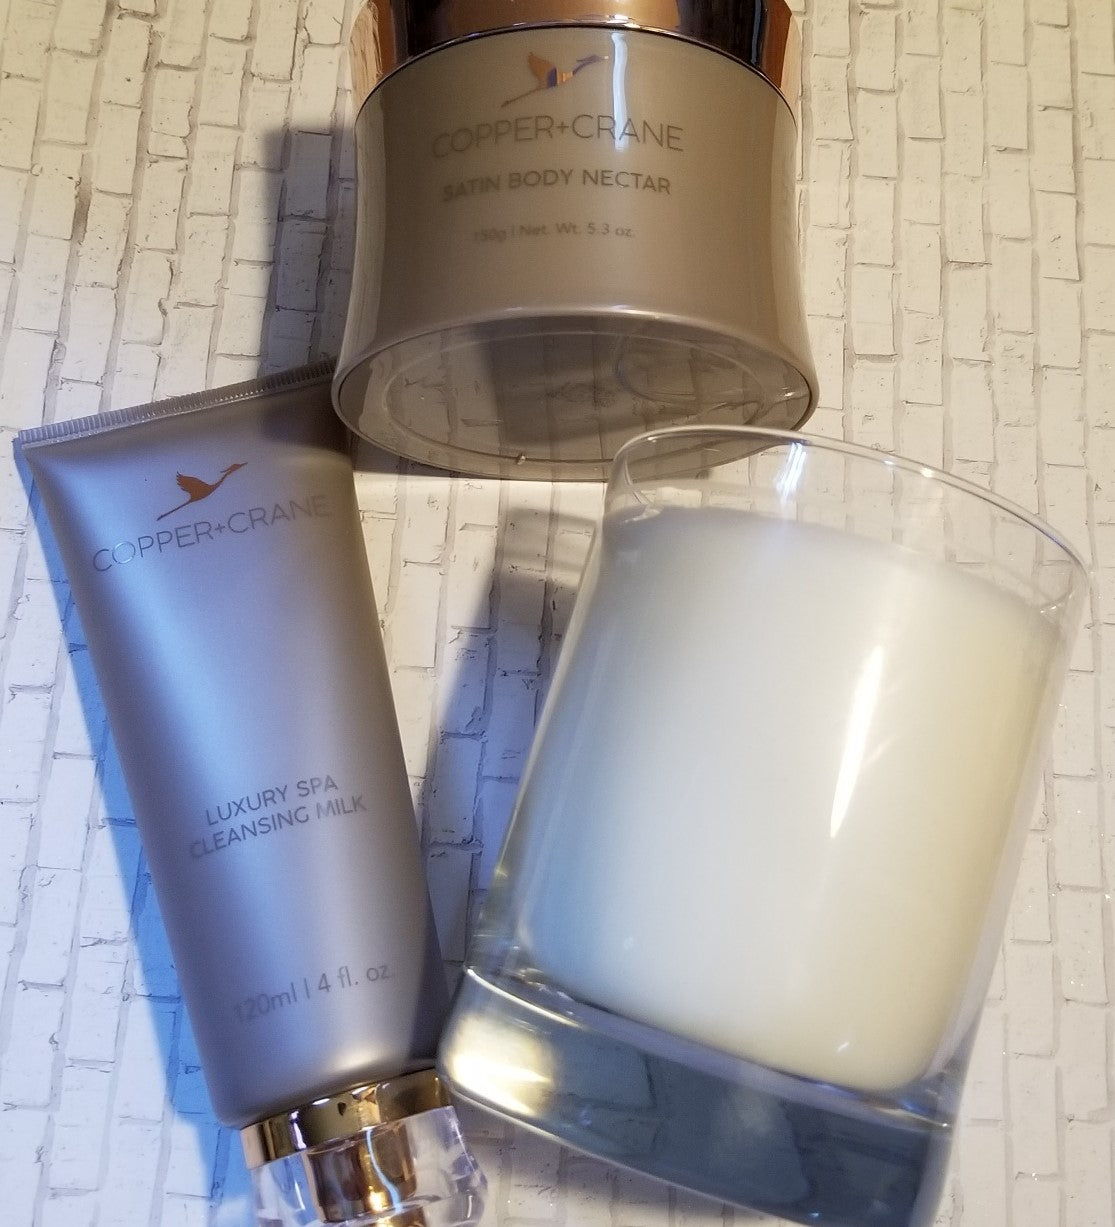 Review, Ingredients, Photos, Skincare Trend 2018, 2019, 2020: Copper + Crane, Satin Body Nectar, Luxury Spa Cleansing Milk, Gardens of Blenheim Candle